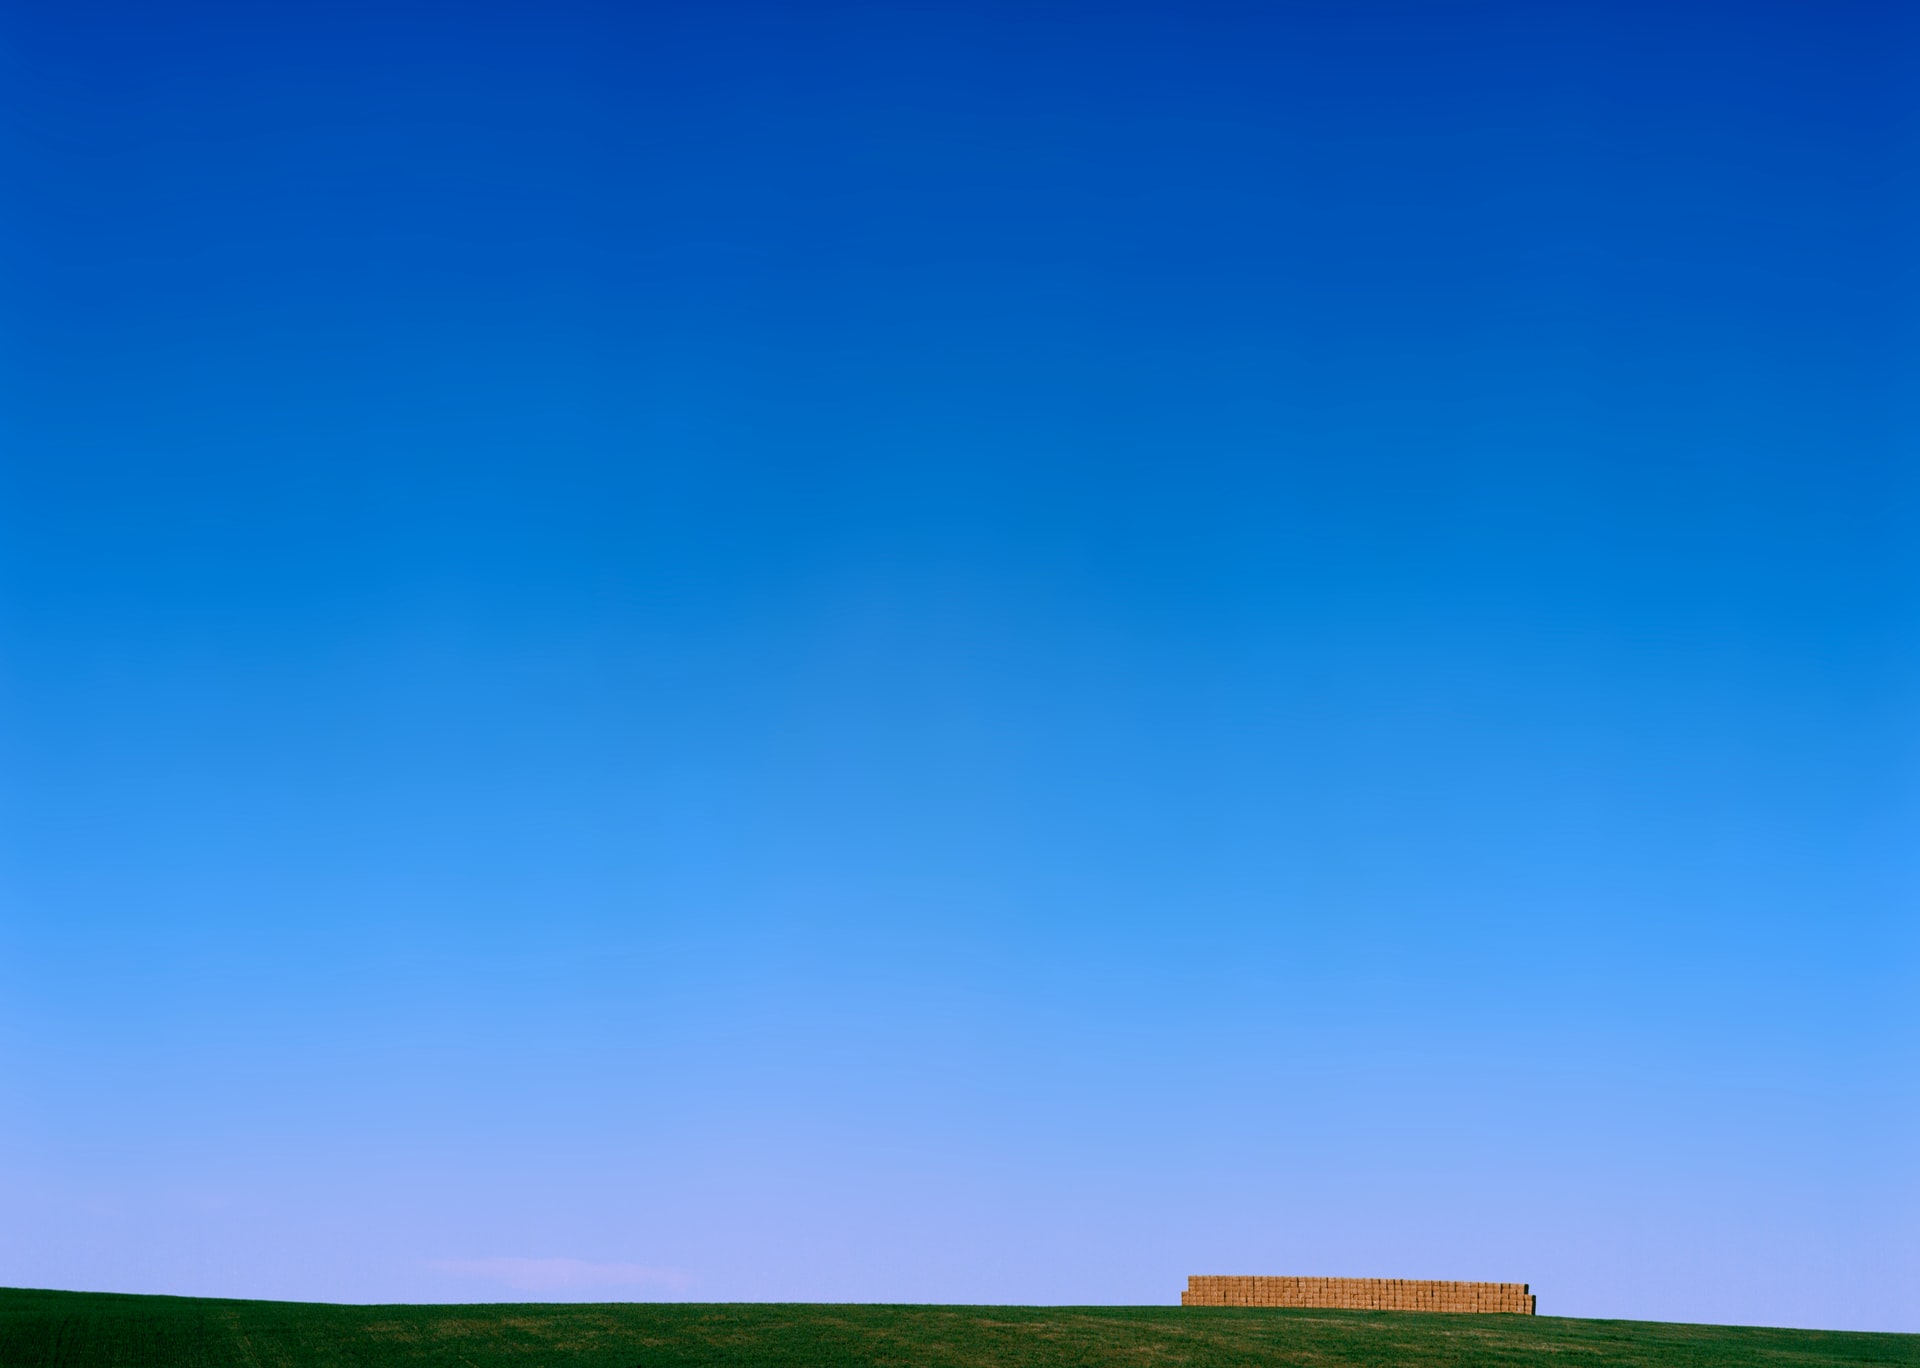 A roadside scene in the farmlands of Drummond, Idaho. Most apparent in the photo is the gradient between a deep blue and sky blue at the horizon